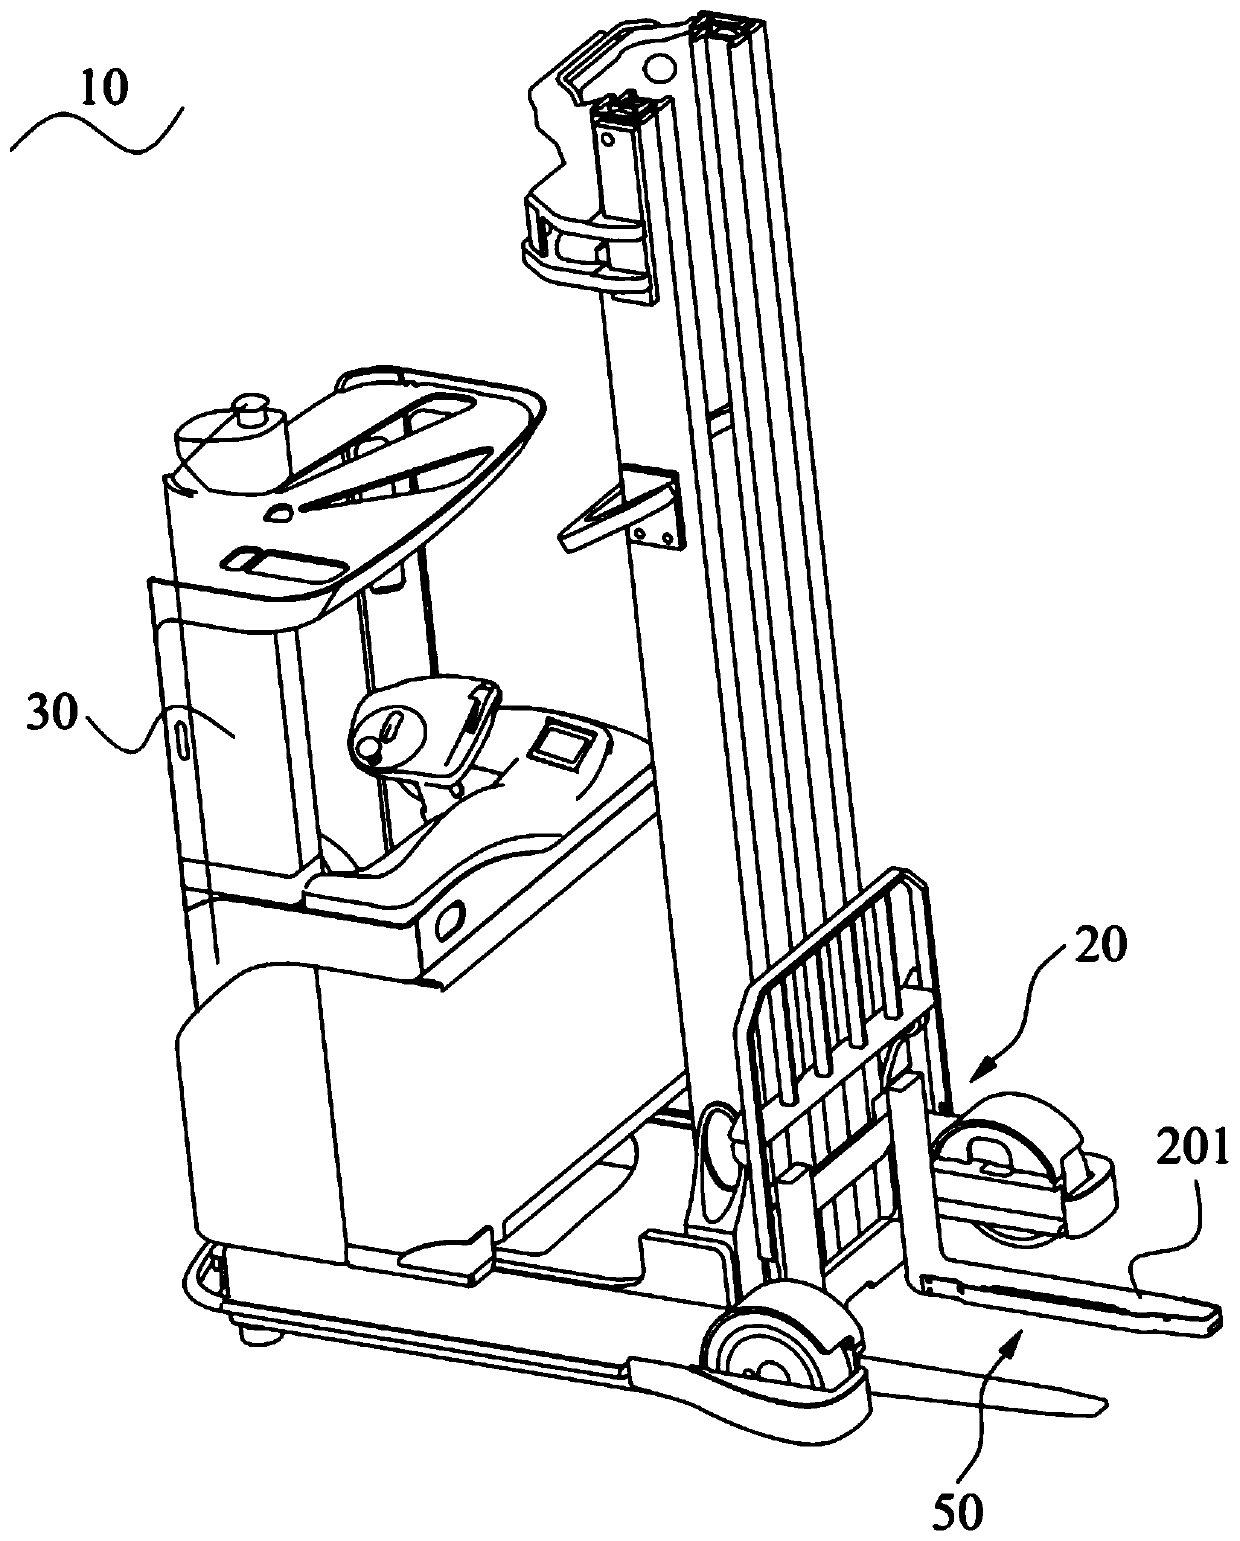 Protecting device and forklift